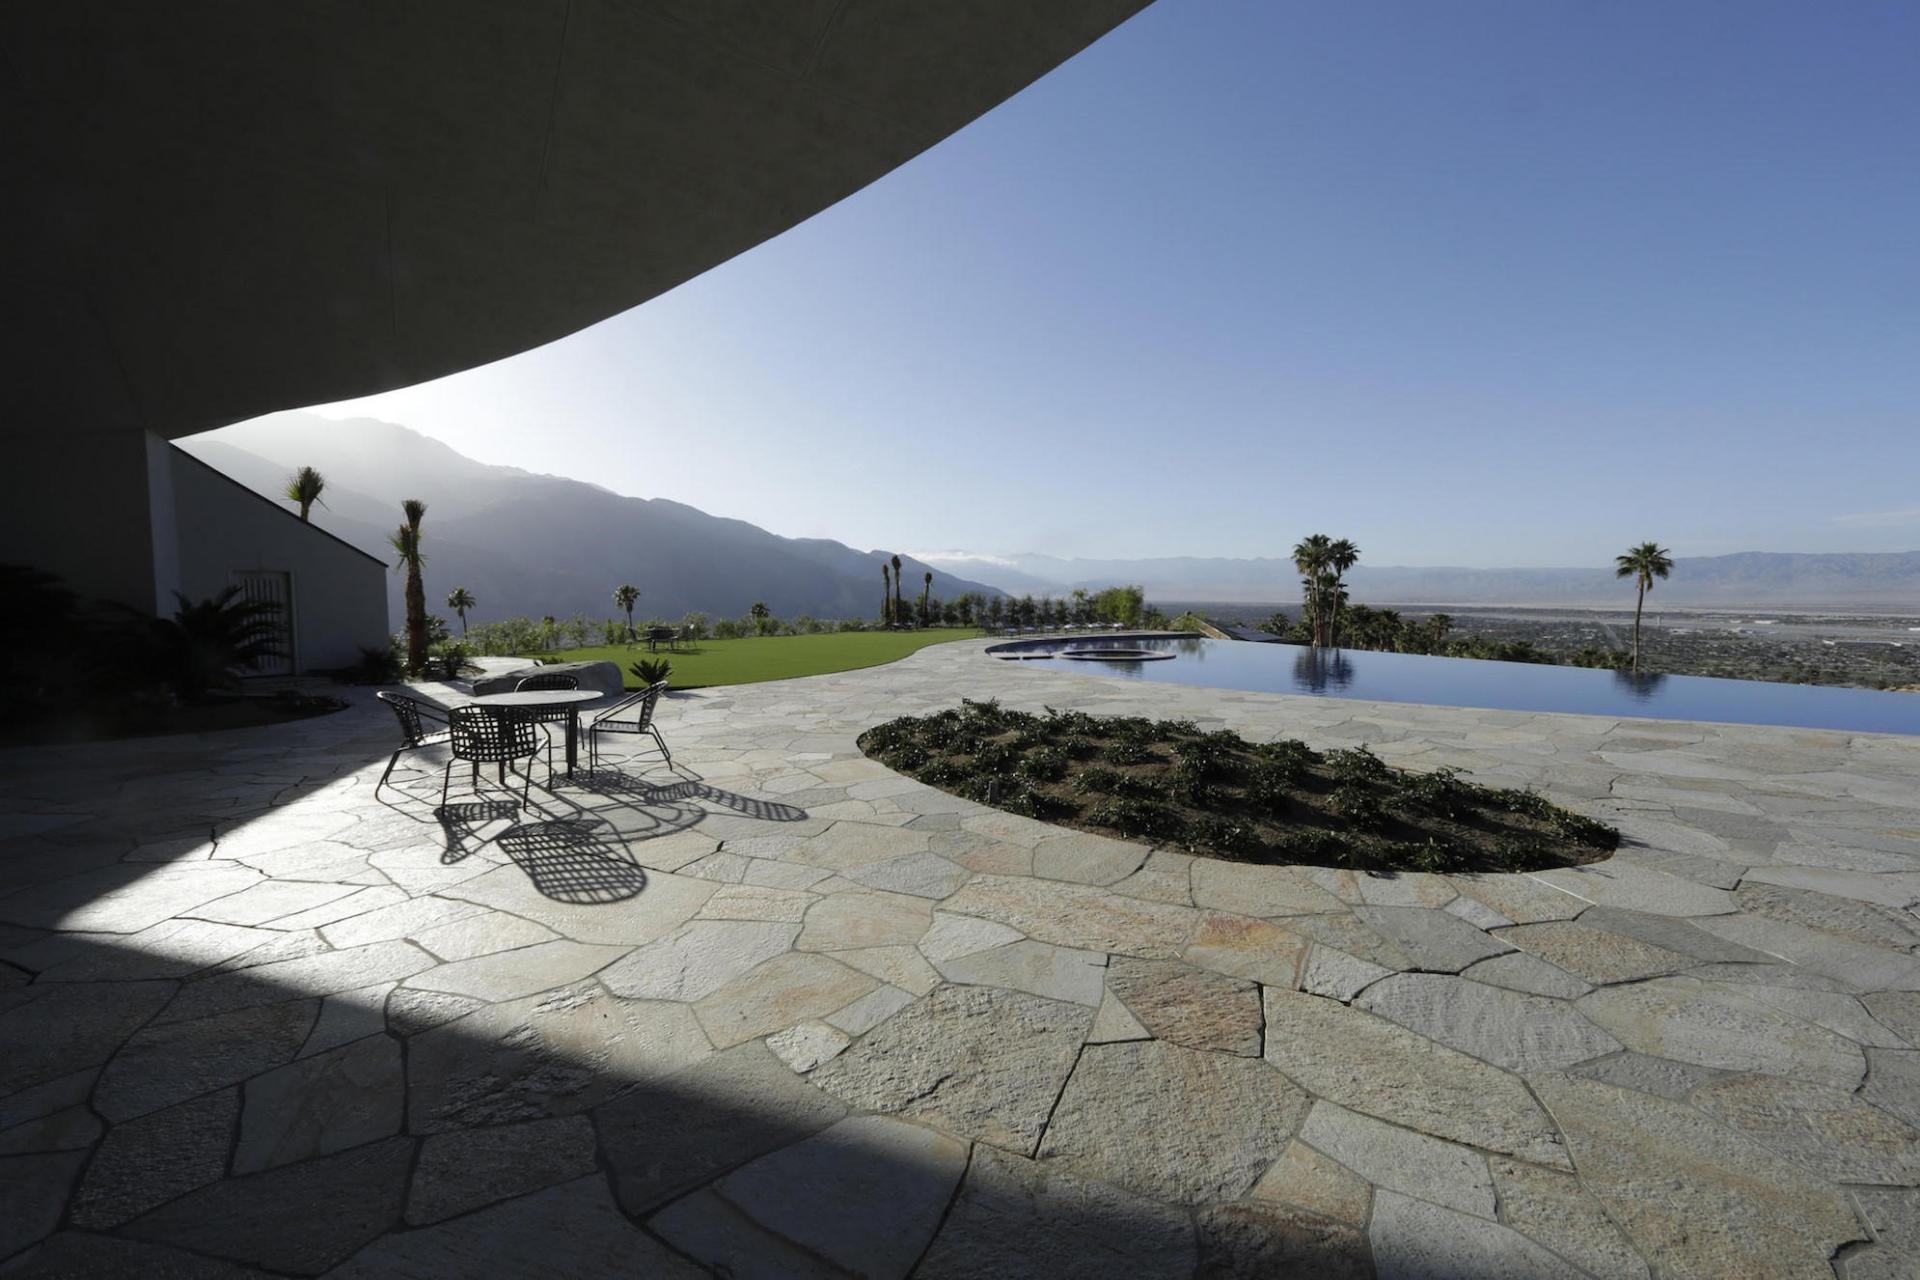 The outdoor terrace looks out to Coachella Valley